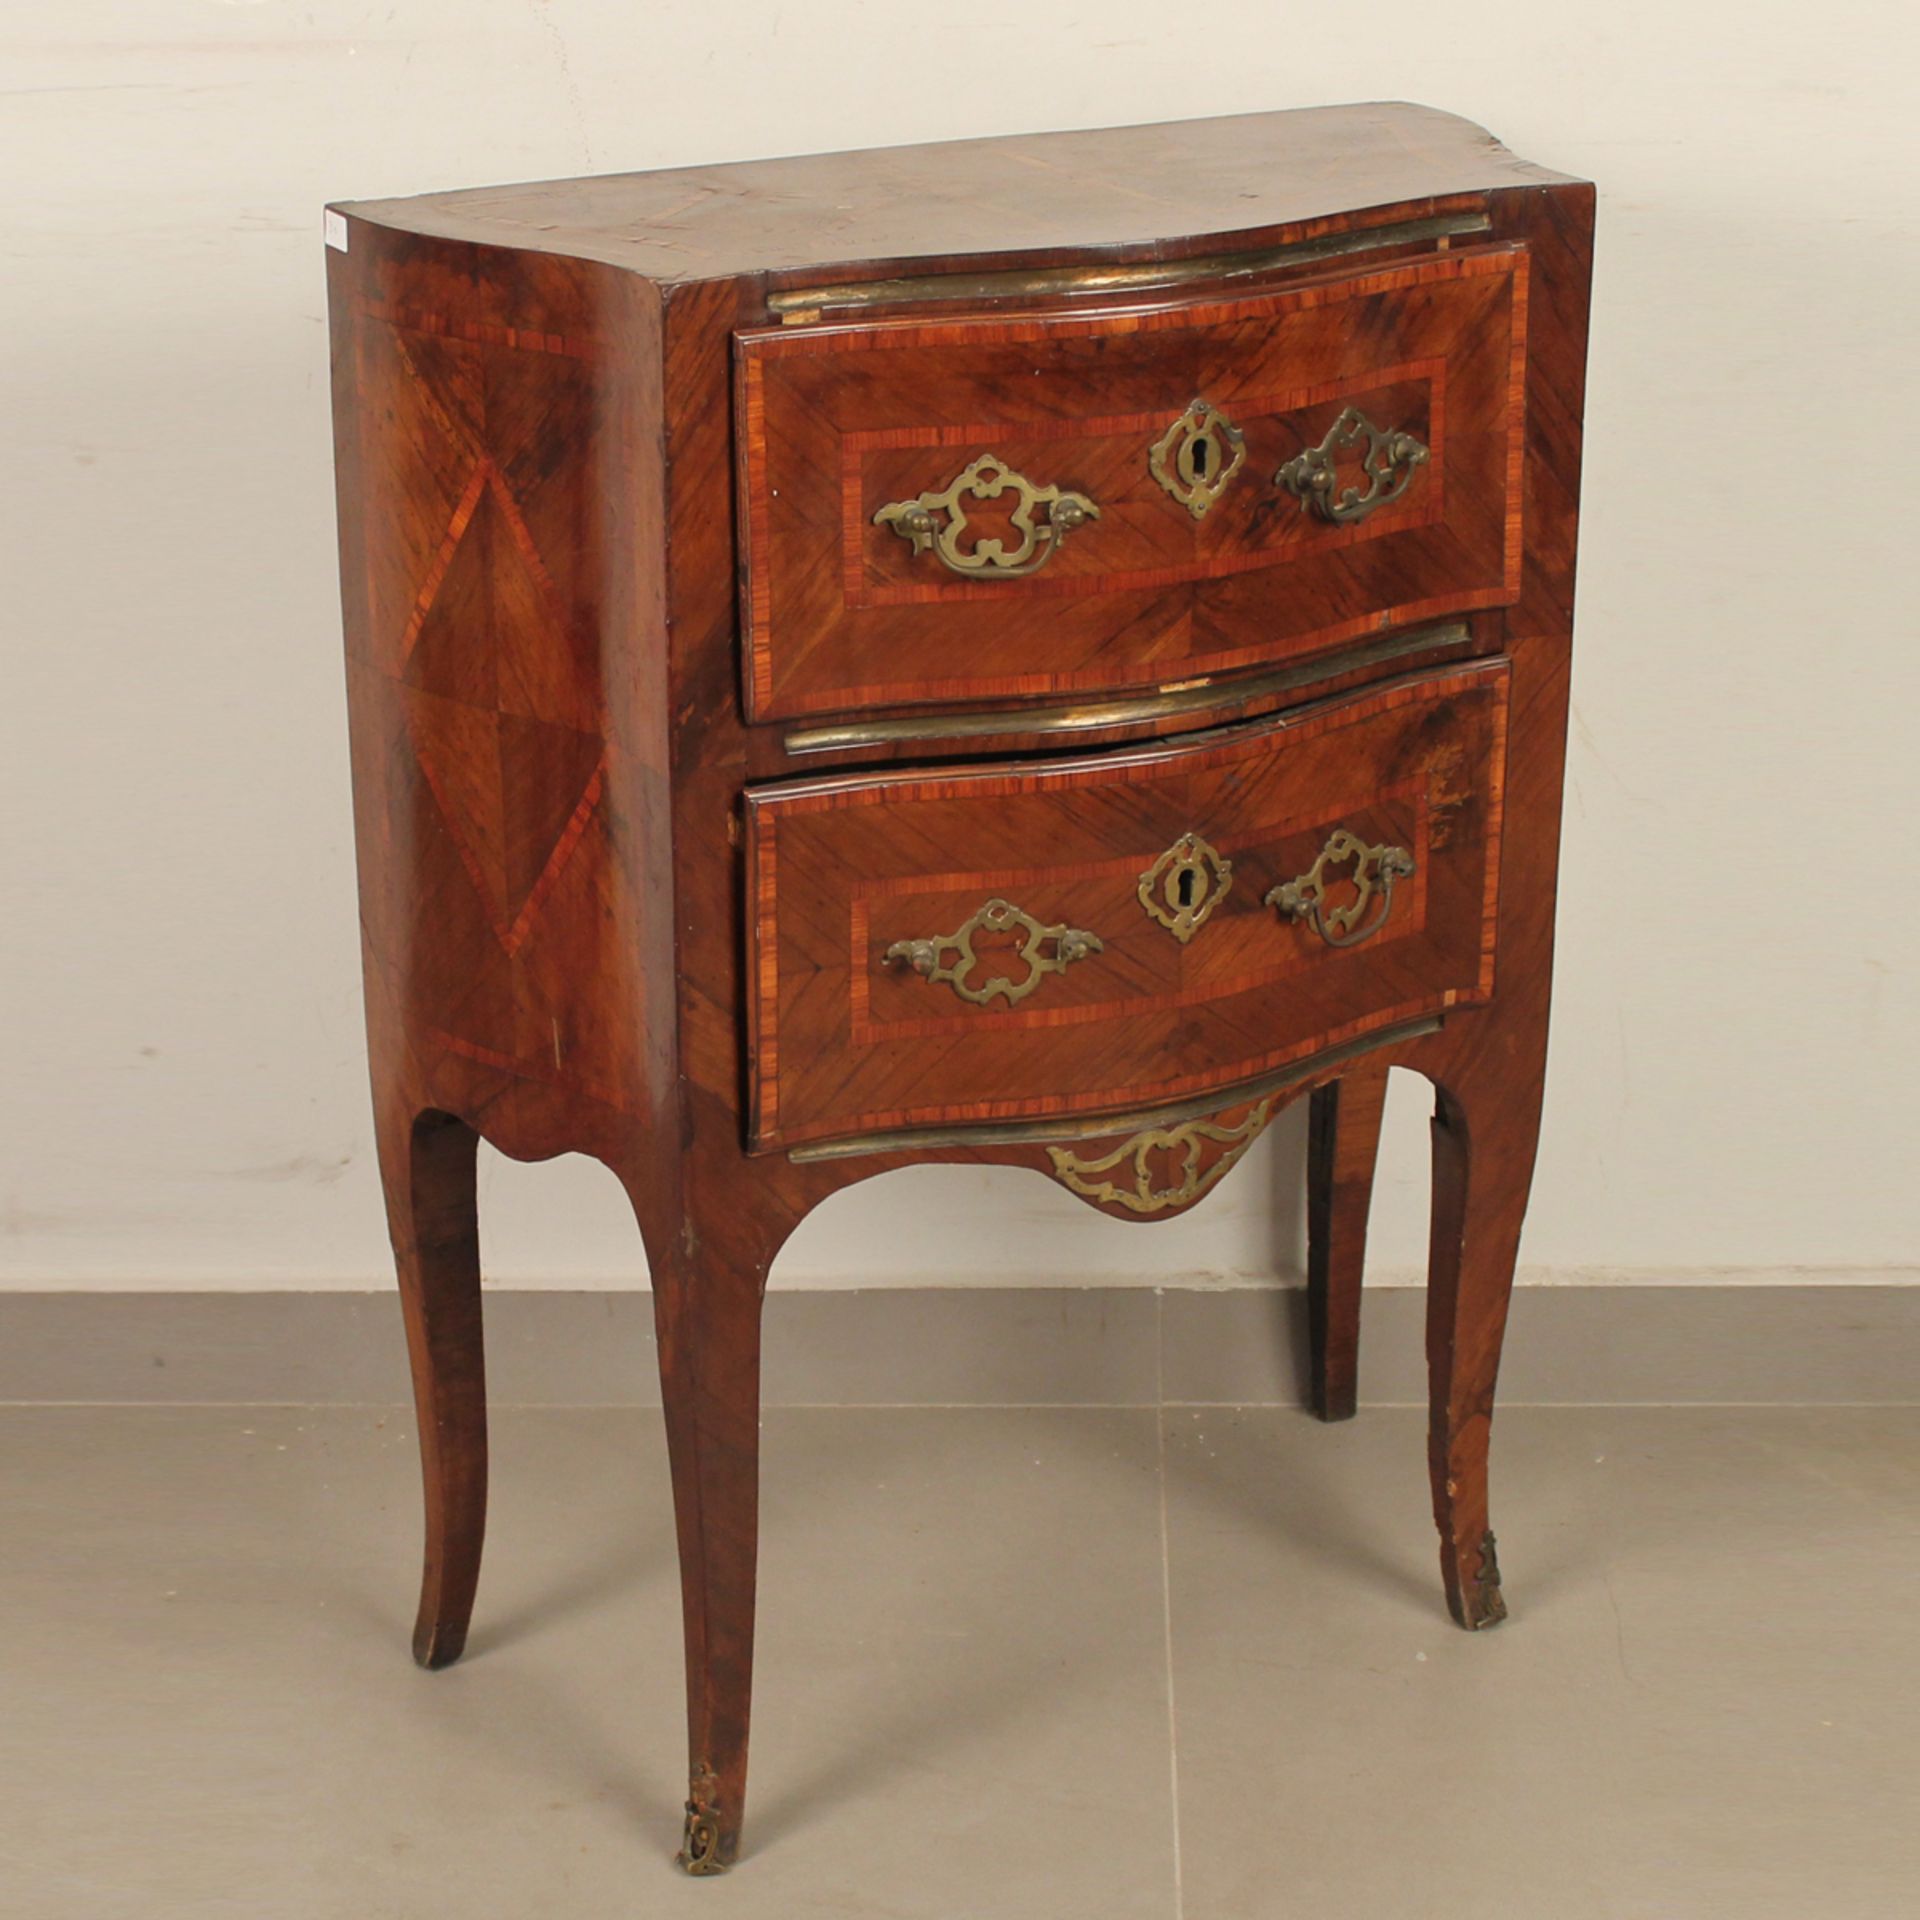 Cassettoncino a due cassetti - Small commode with two drawers - Image 2 of 3